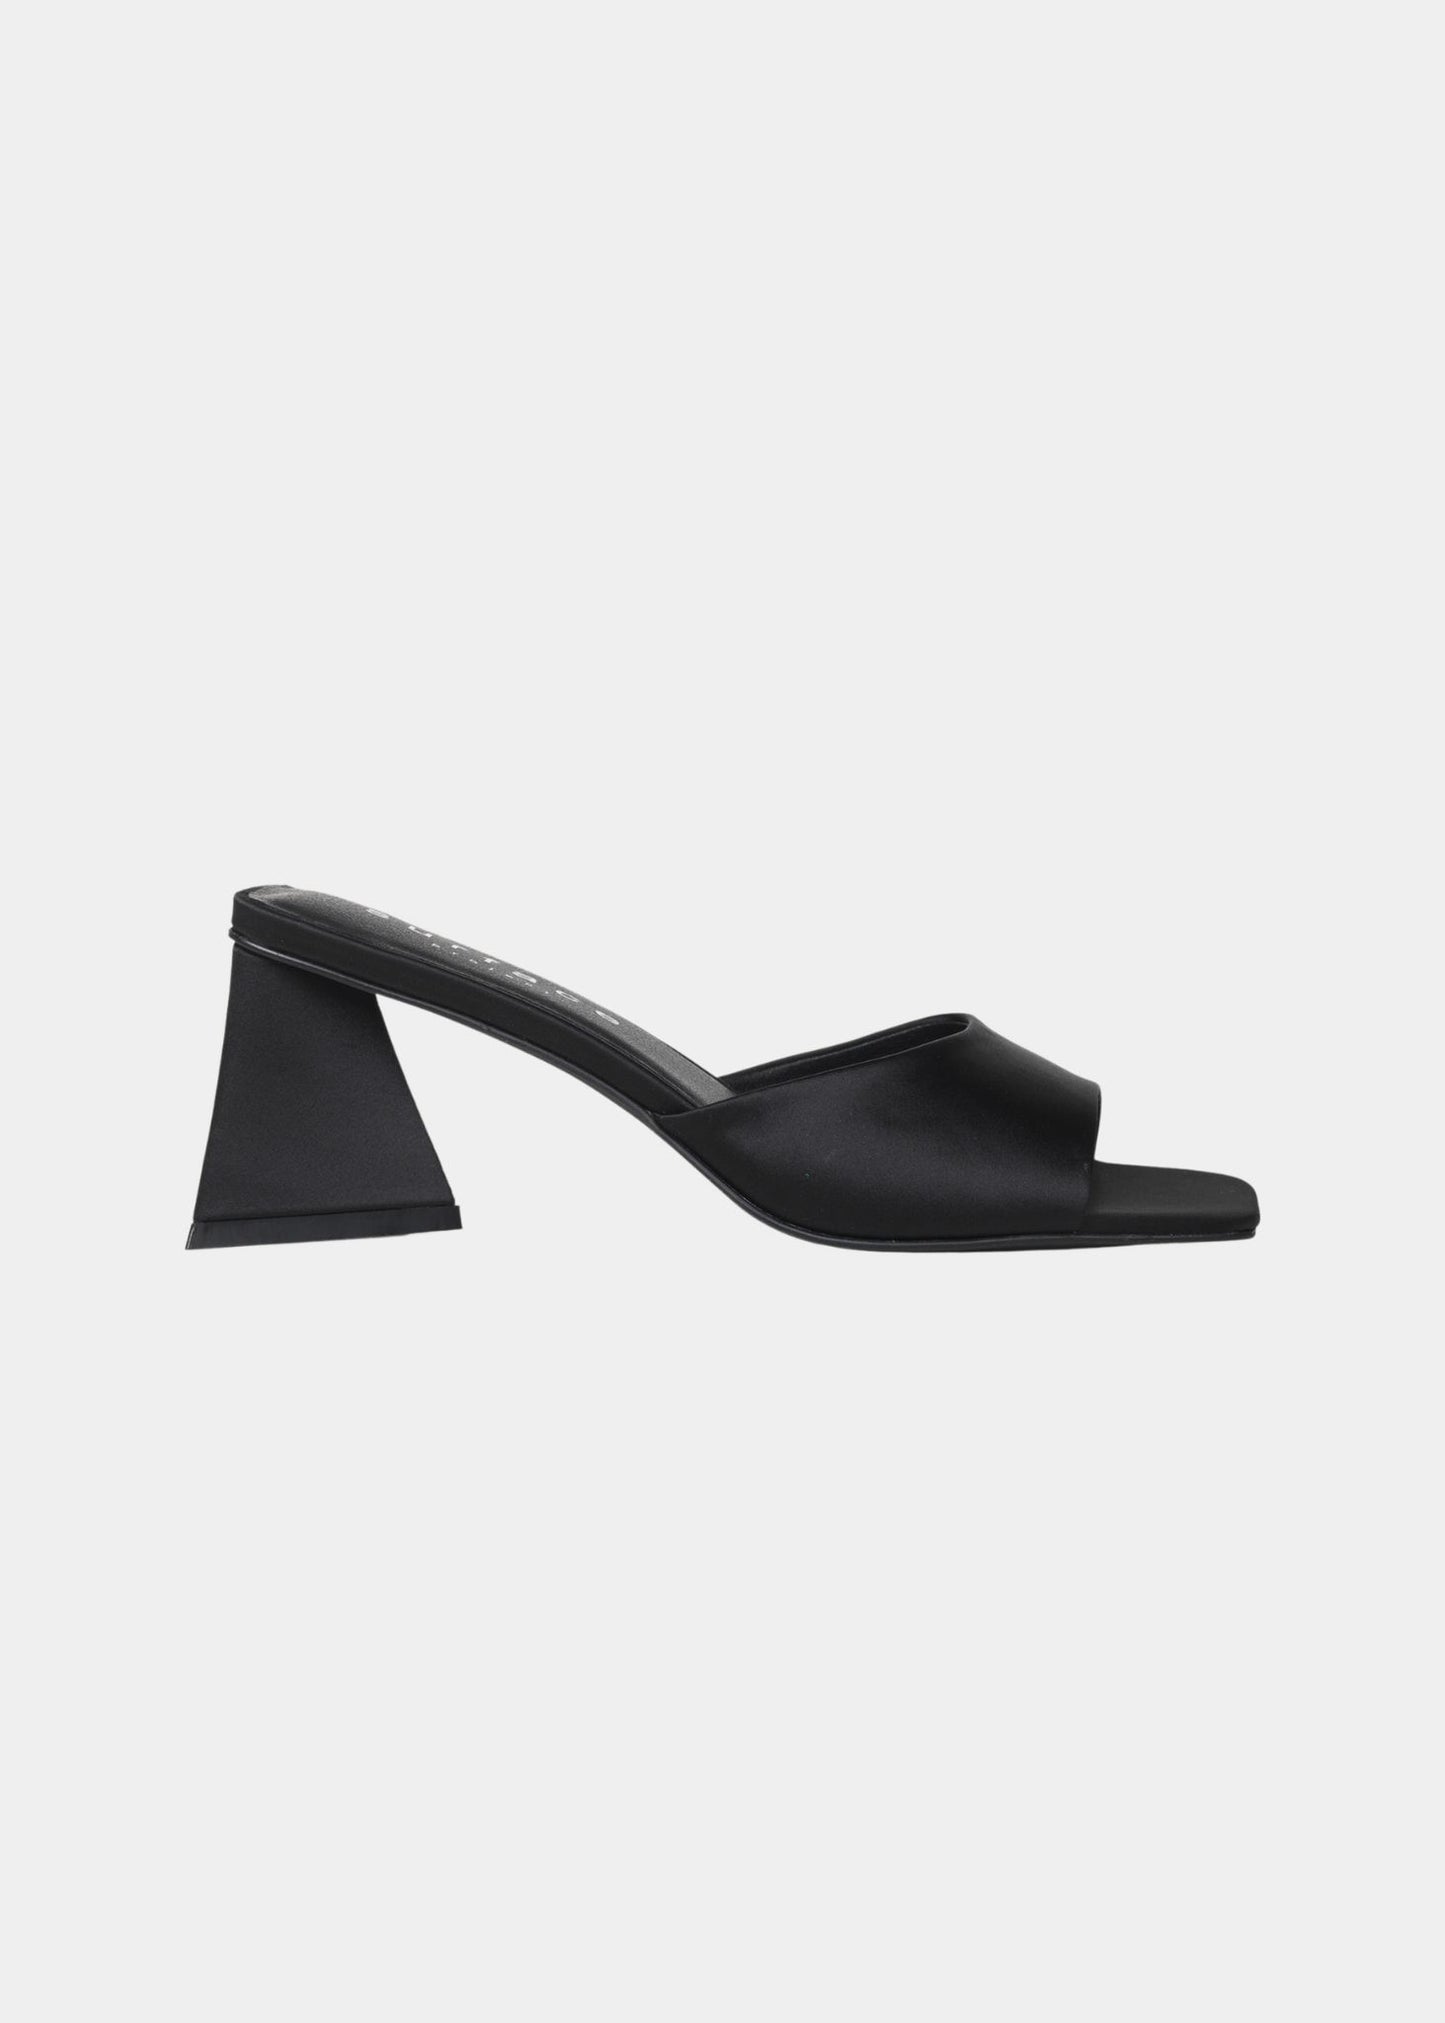 SURFACE PROJECT Square Heeled Sandals